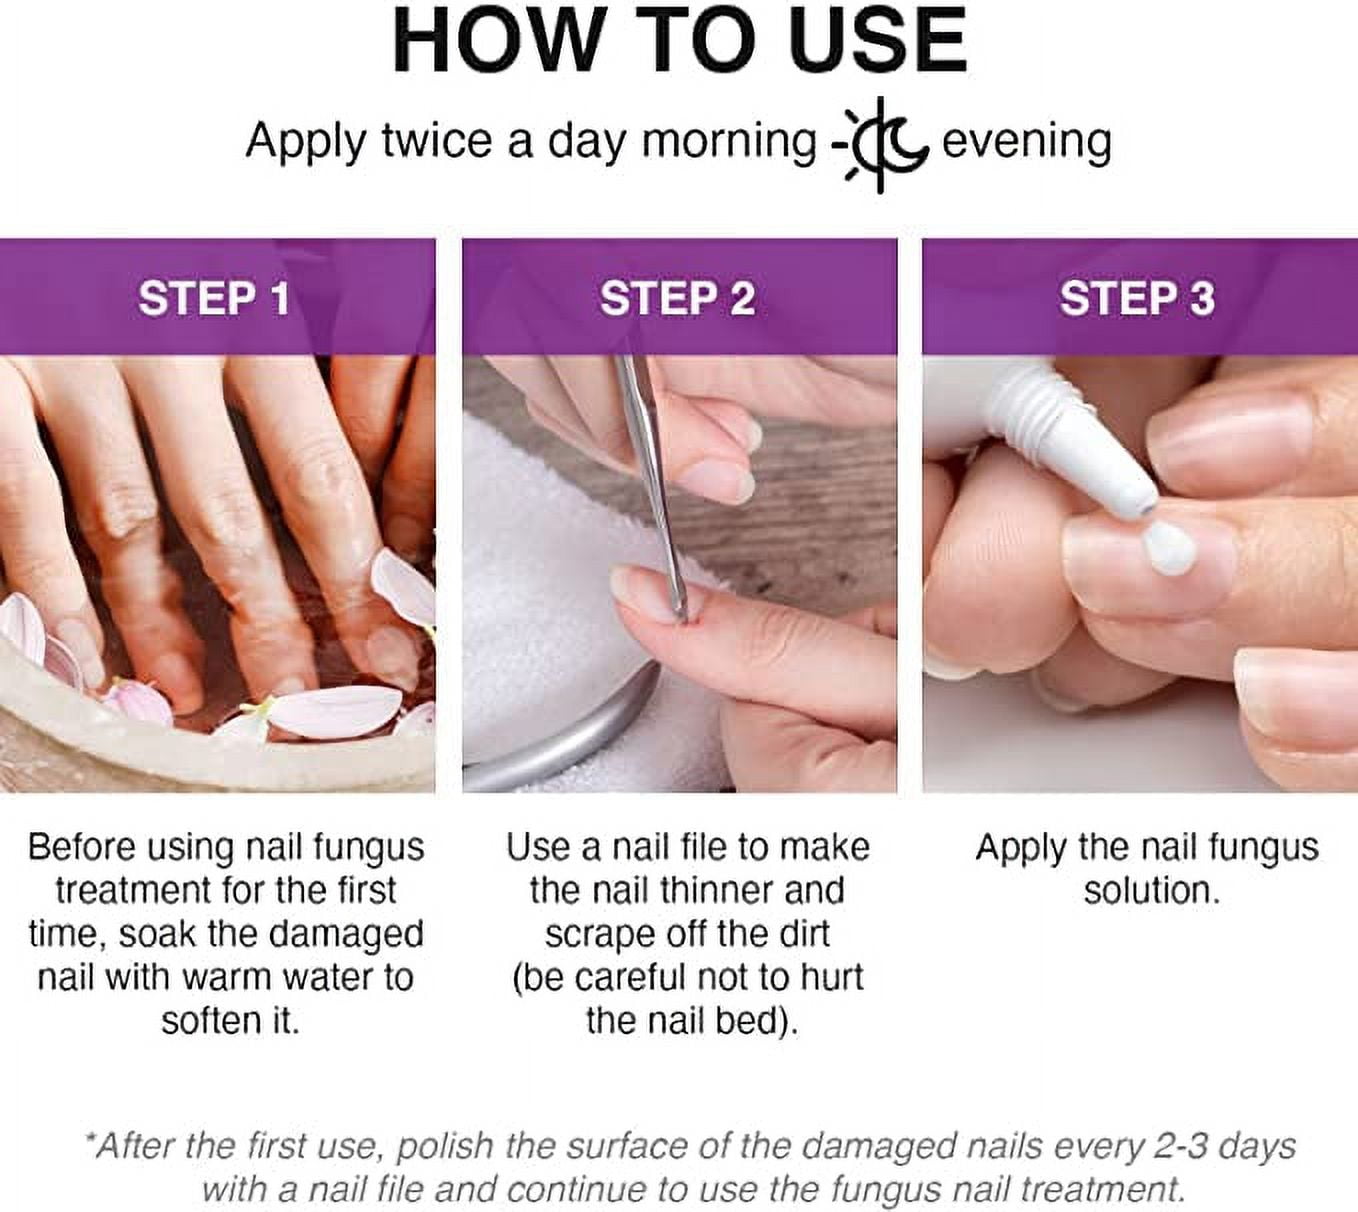 Top 5 home remedies for toenail fungus | TheHealthSite.com